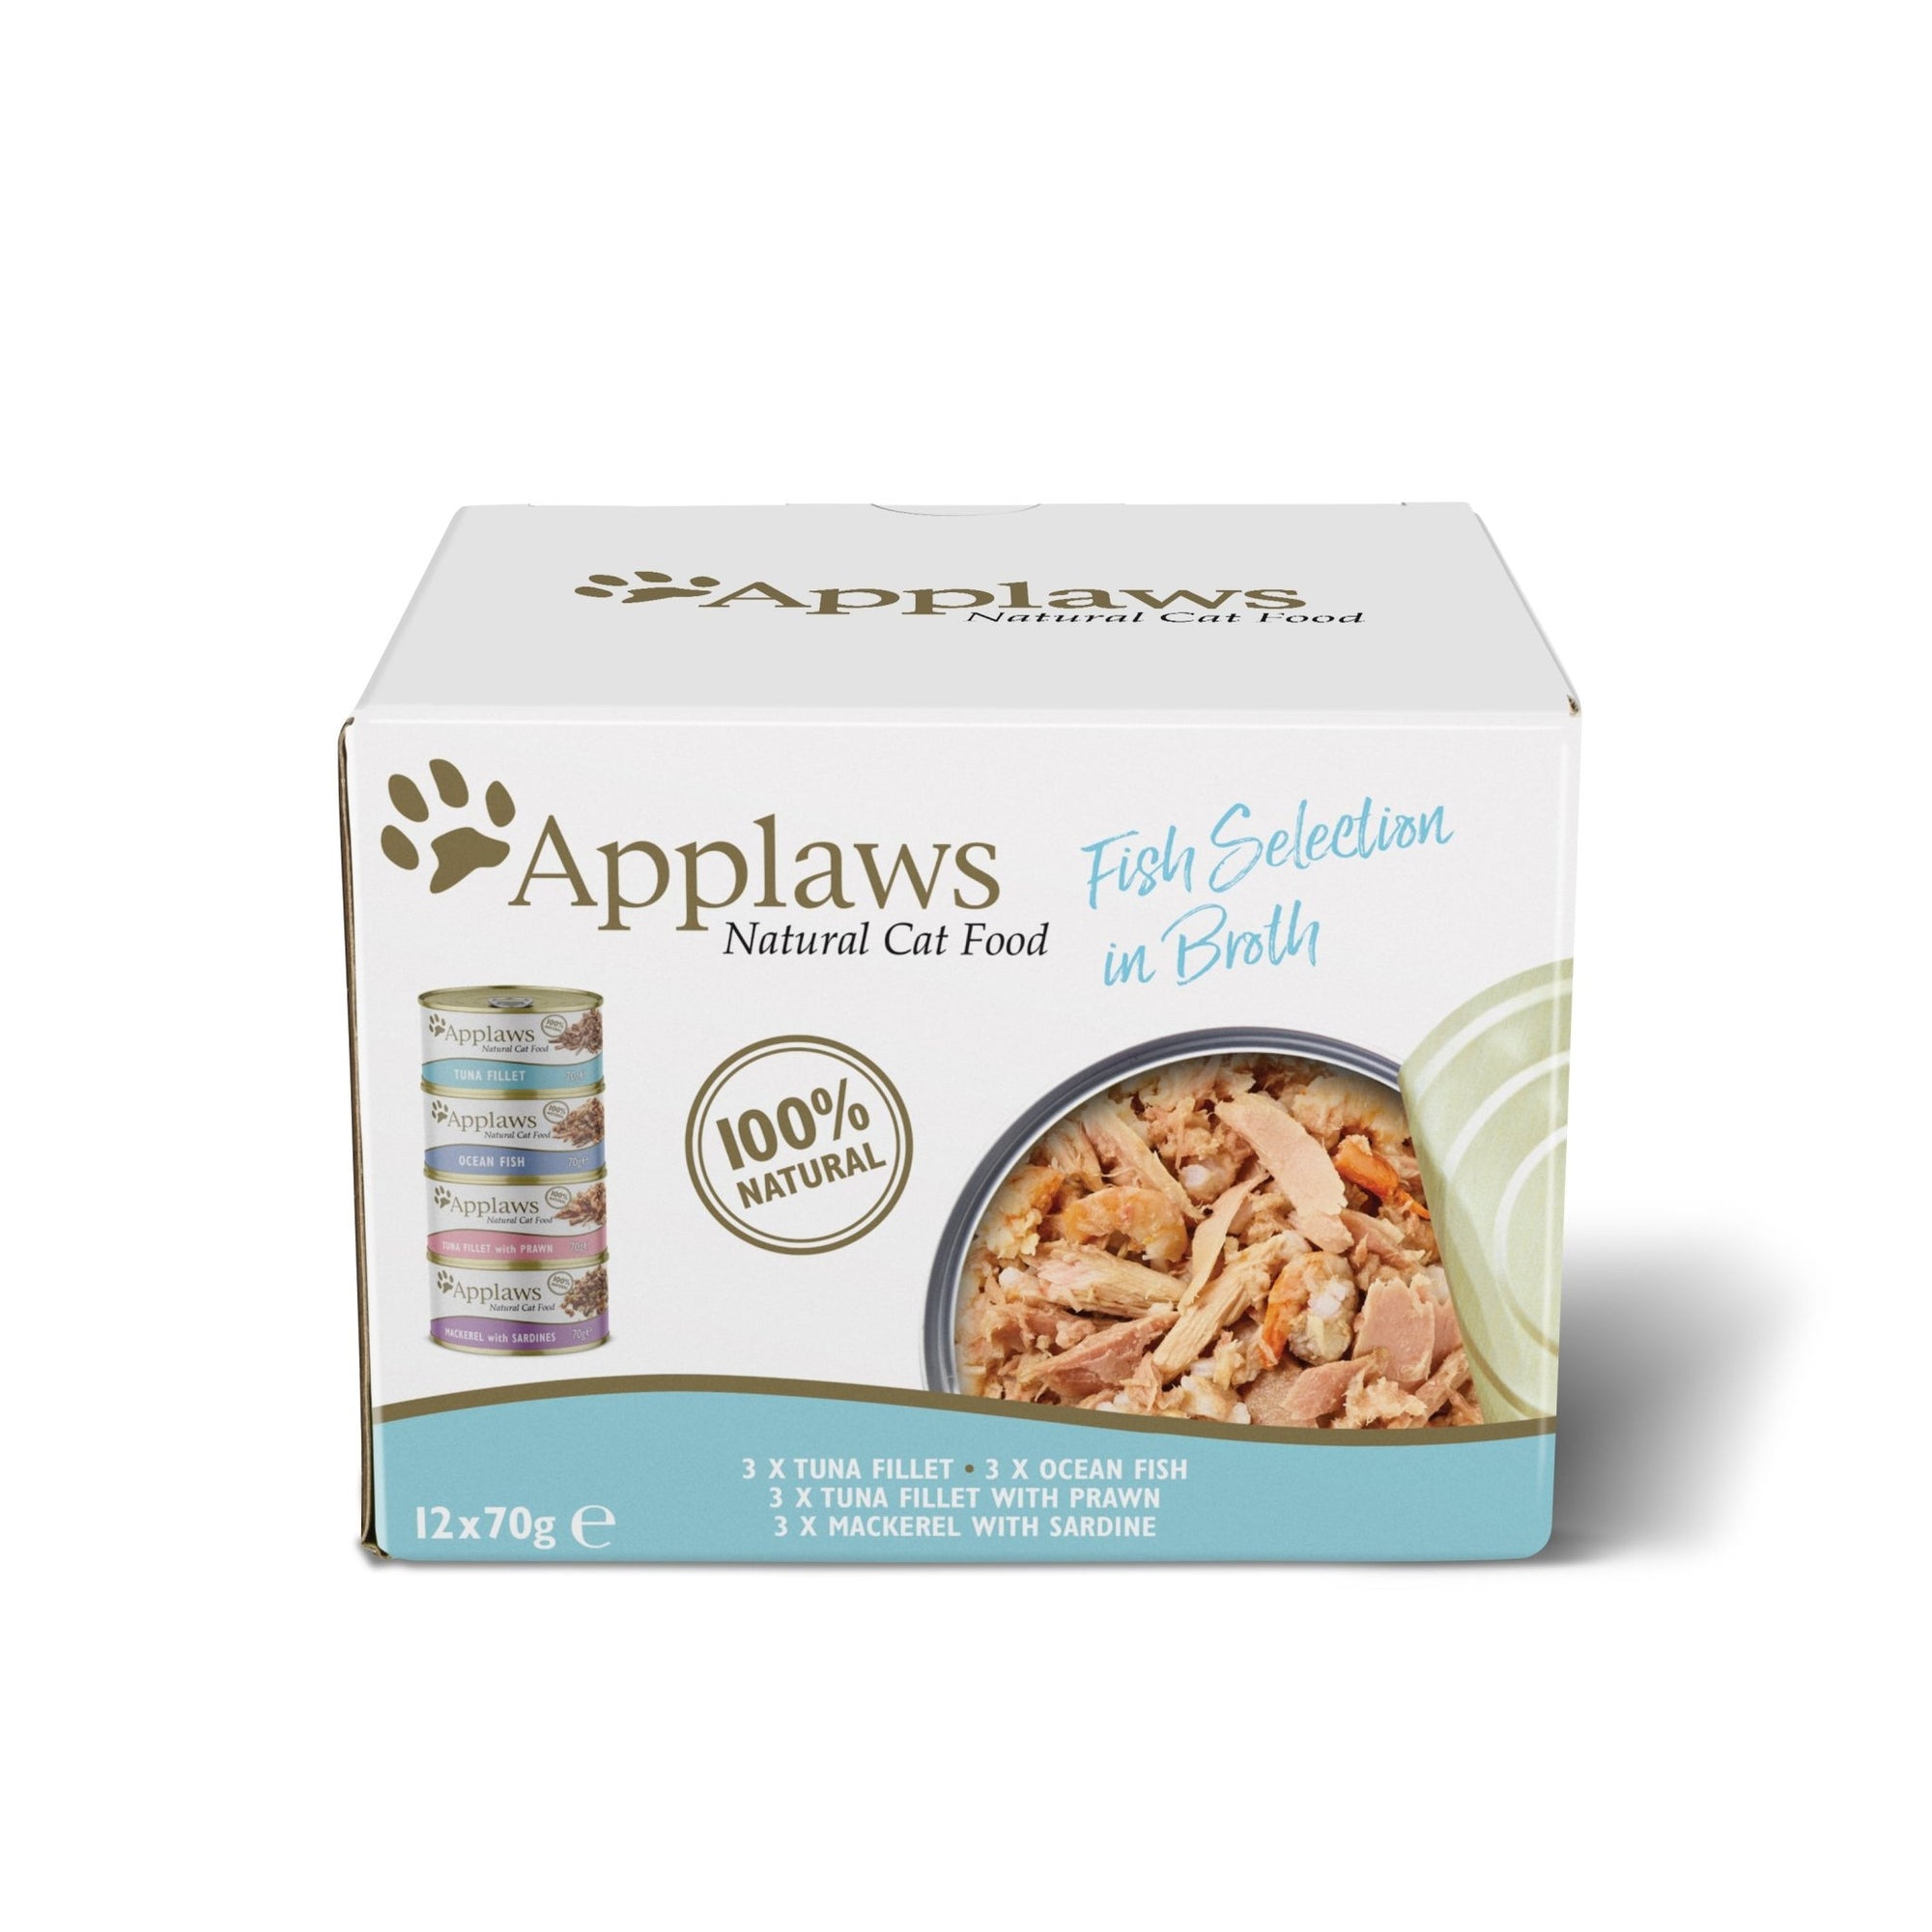 Applaws Cat Fish Selection in Broth Tins 4x (12x70g), Applaws,